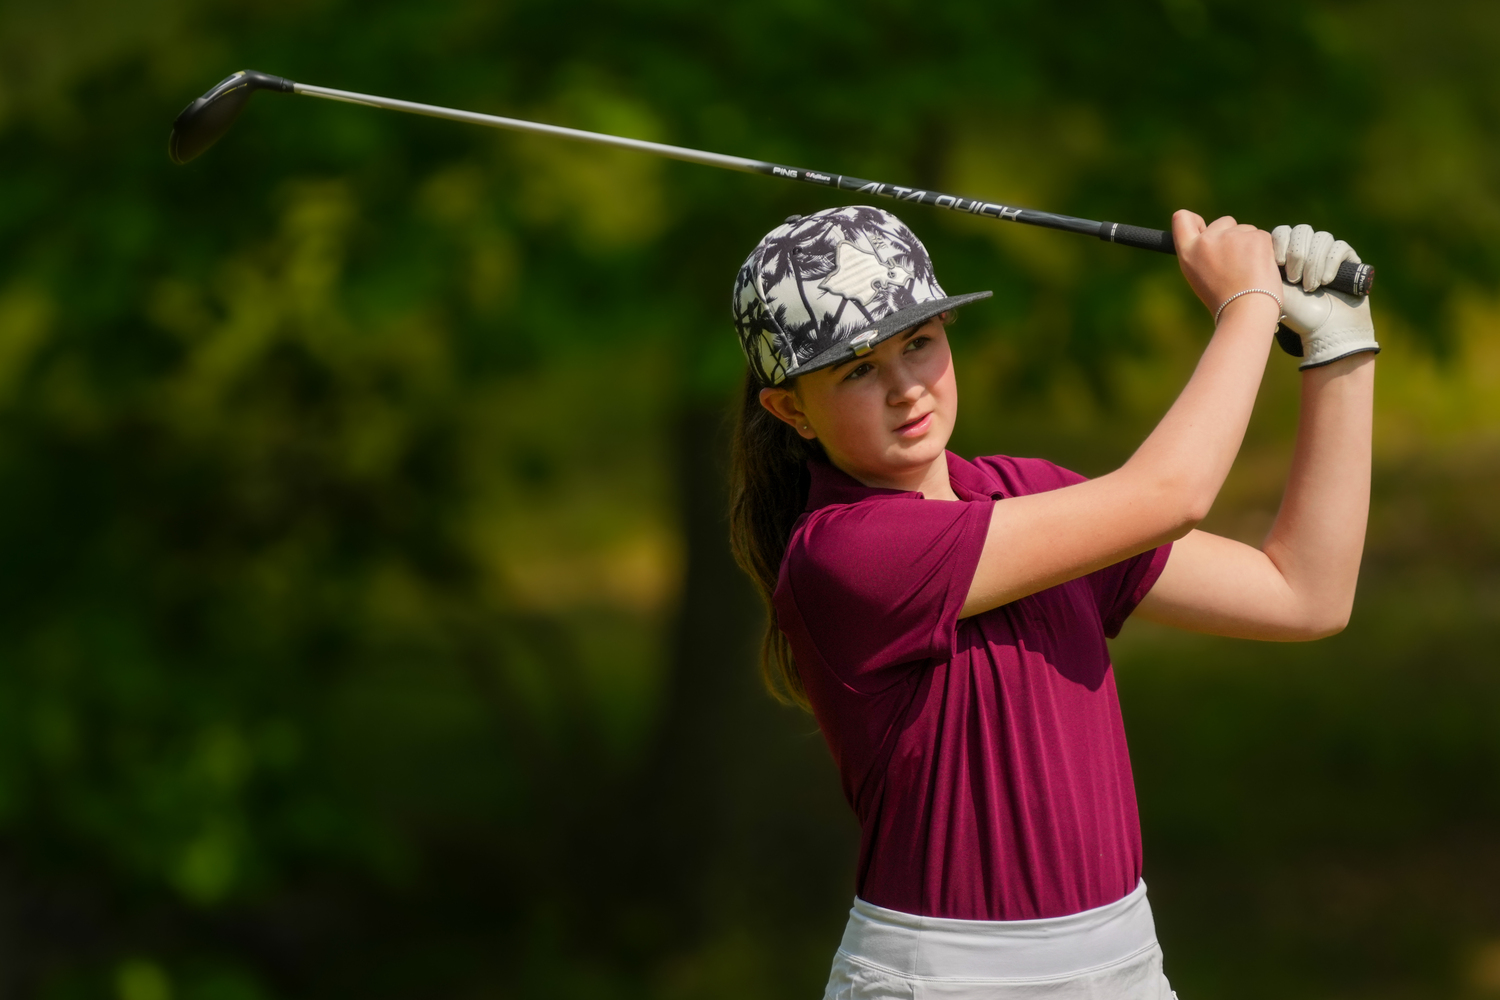 Southampton's top duo of eighth-grader Elie Poremba (77) and senior Ella Coady (78) were atop the leaderboard, respectively, after the first day of the Suffolk County Girls Golf Championships on Monday at Middle Island Golf Club. As a team the Mariners went into the second and final day of competition four shots off the lead. For a full story go to 27east.com.     RON ESPOSITO